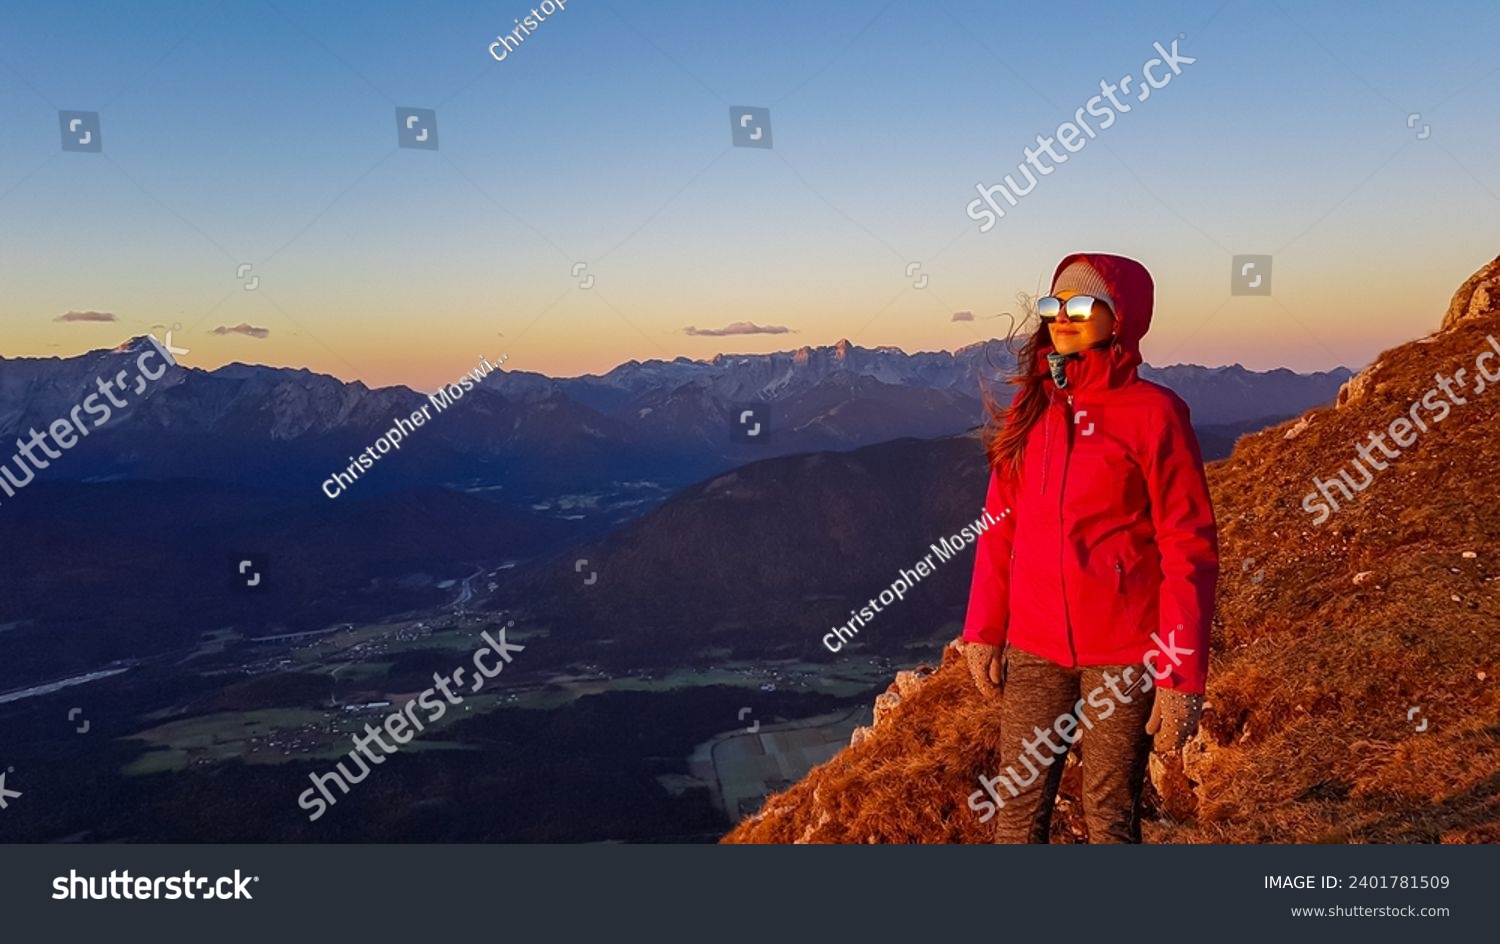 Happy woman enjoying scenic view during sunrise from Dobratsch, Villacher Alps, Carinthia, Austria, Europe. Looking at mountain ranges Julian Alps and Karawanks. Sunbeams reflecting in sunglasses. #2401781509